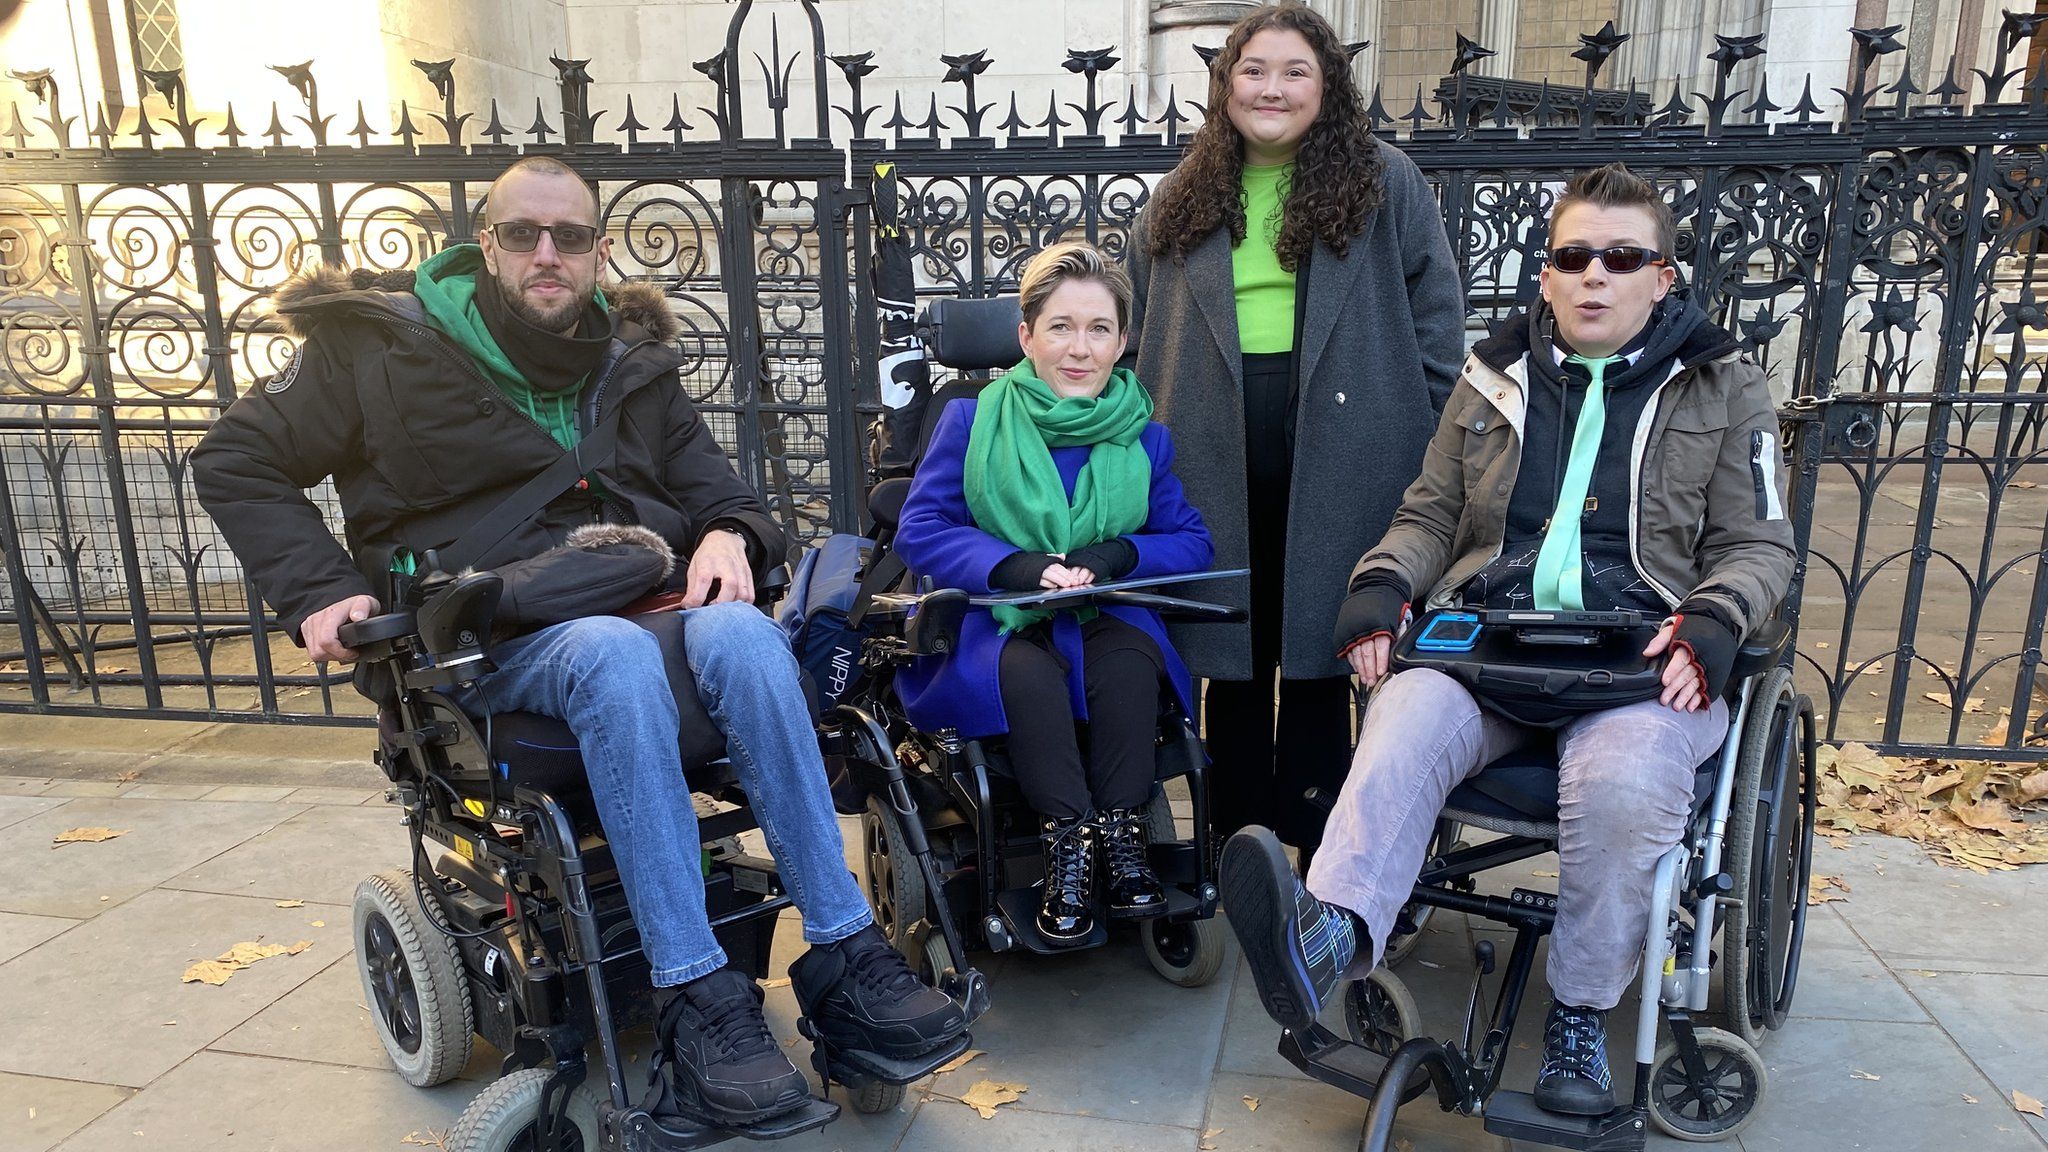 Claddag campaigners outside the Royal Courts of Justice. Adam Gabsi left, sitting in his mobility scooter. Sarah Rennie, centre, sitting in her mobility scooter. Georgie Hulme, right, sitting in her mobility scooter outside the High Court.